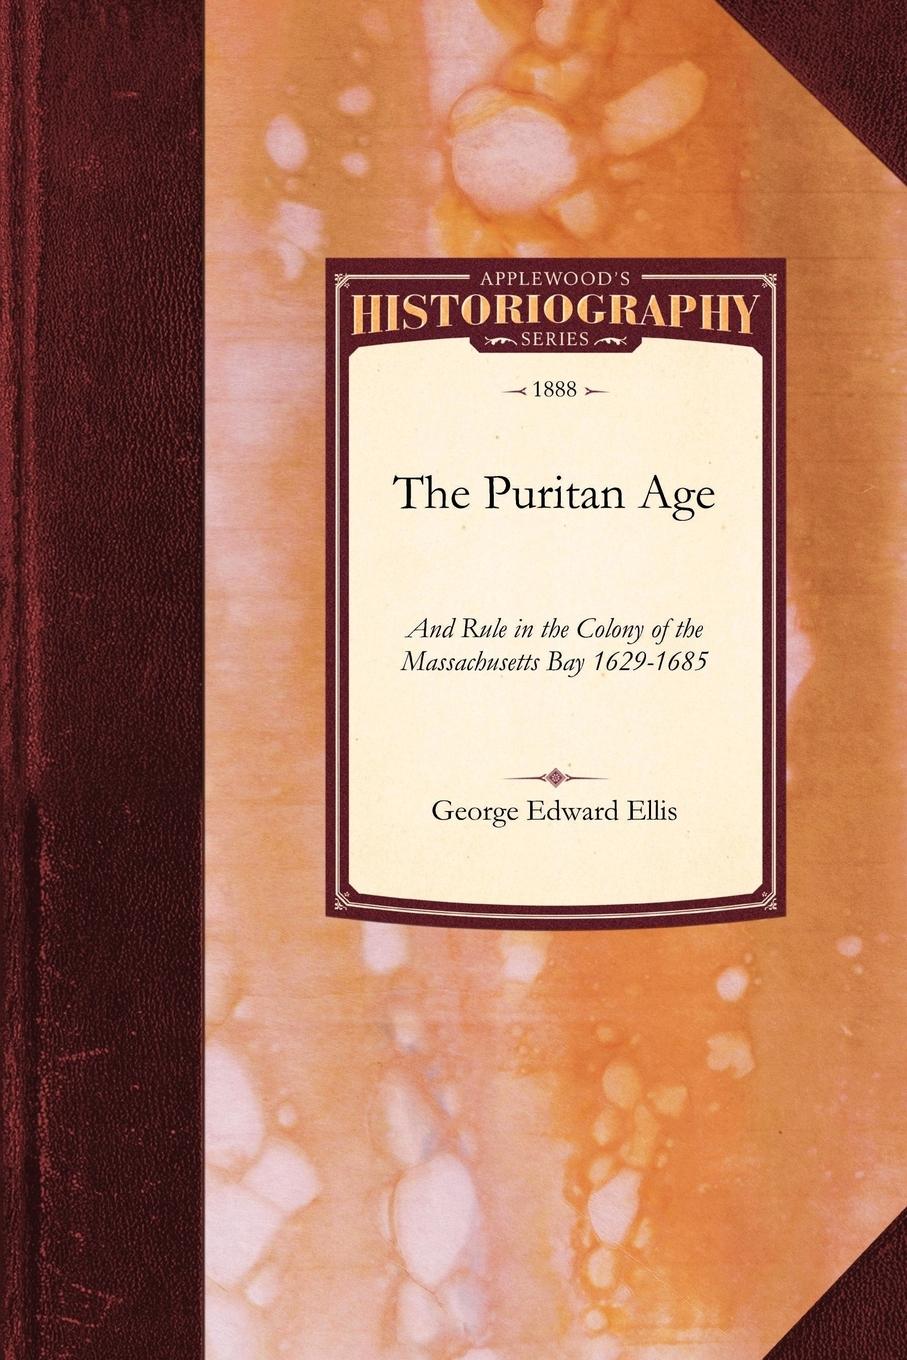 The Puritan Age and Rule in the Colony of the Massachusetts Bay, 1629-1685 - Ellis, George Edward|Ellis, George